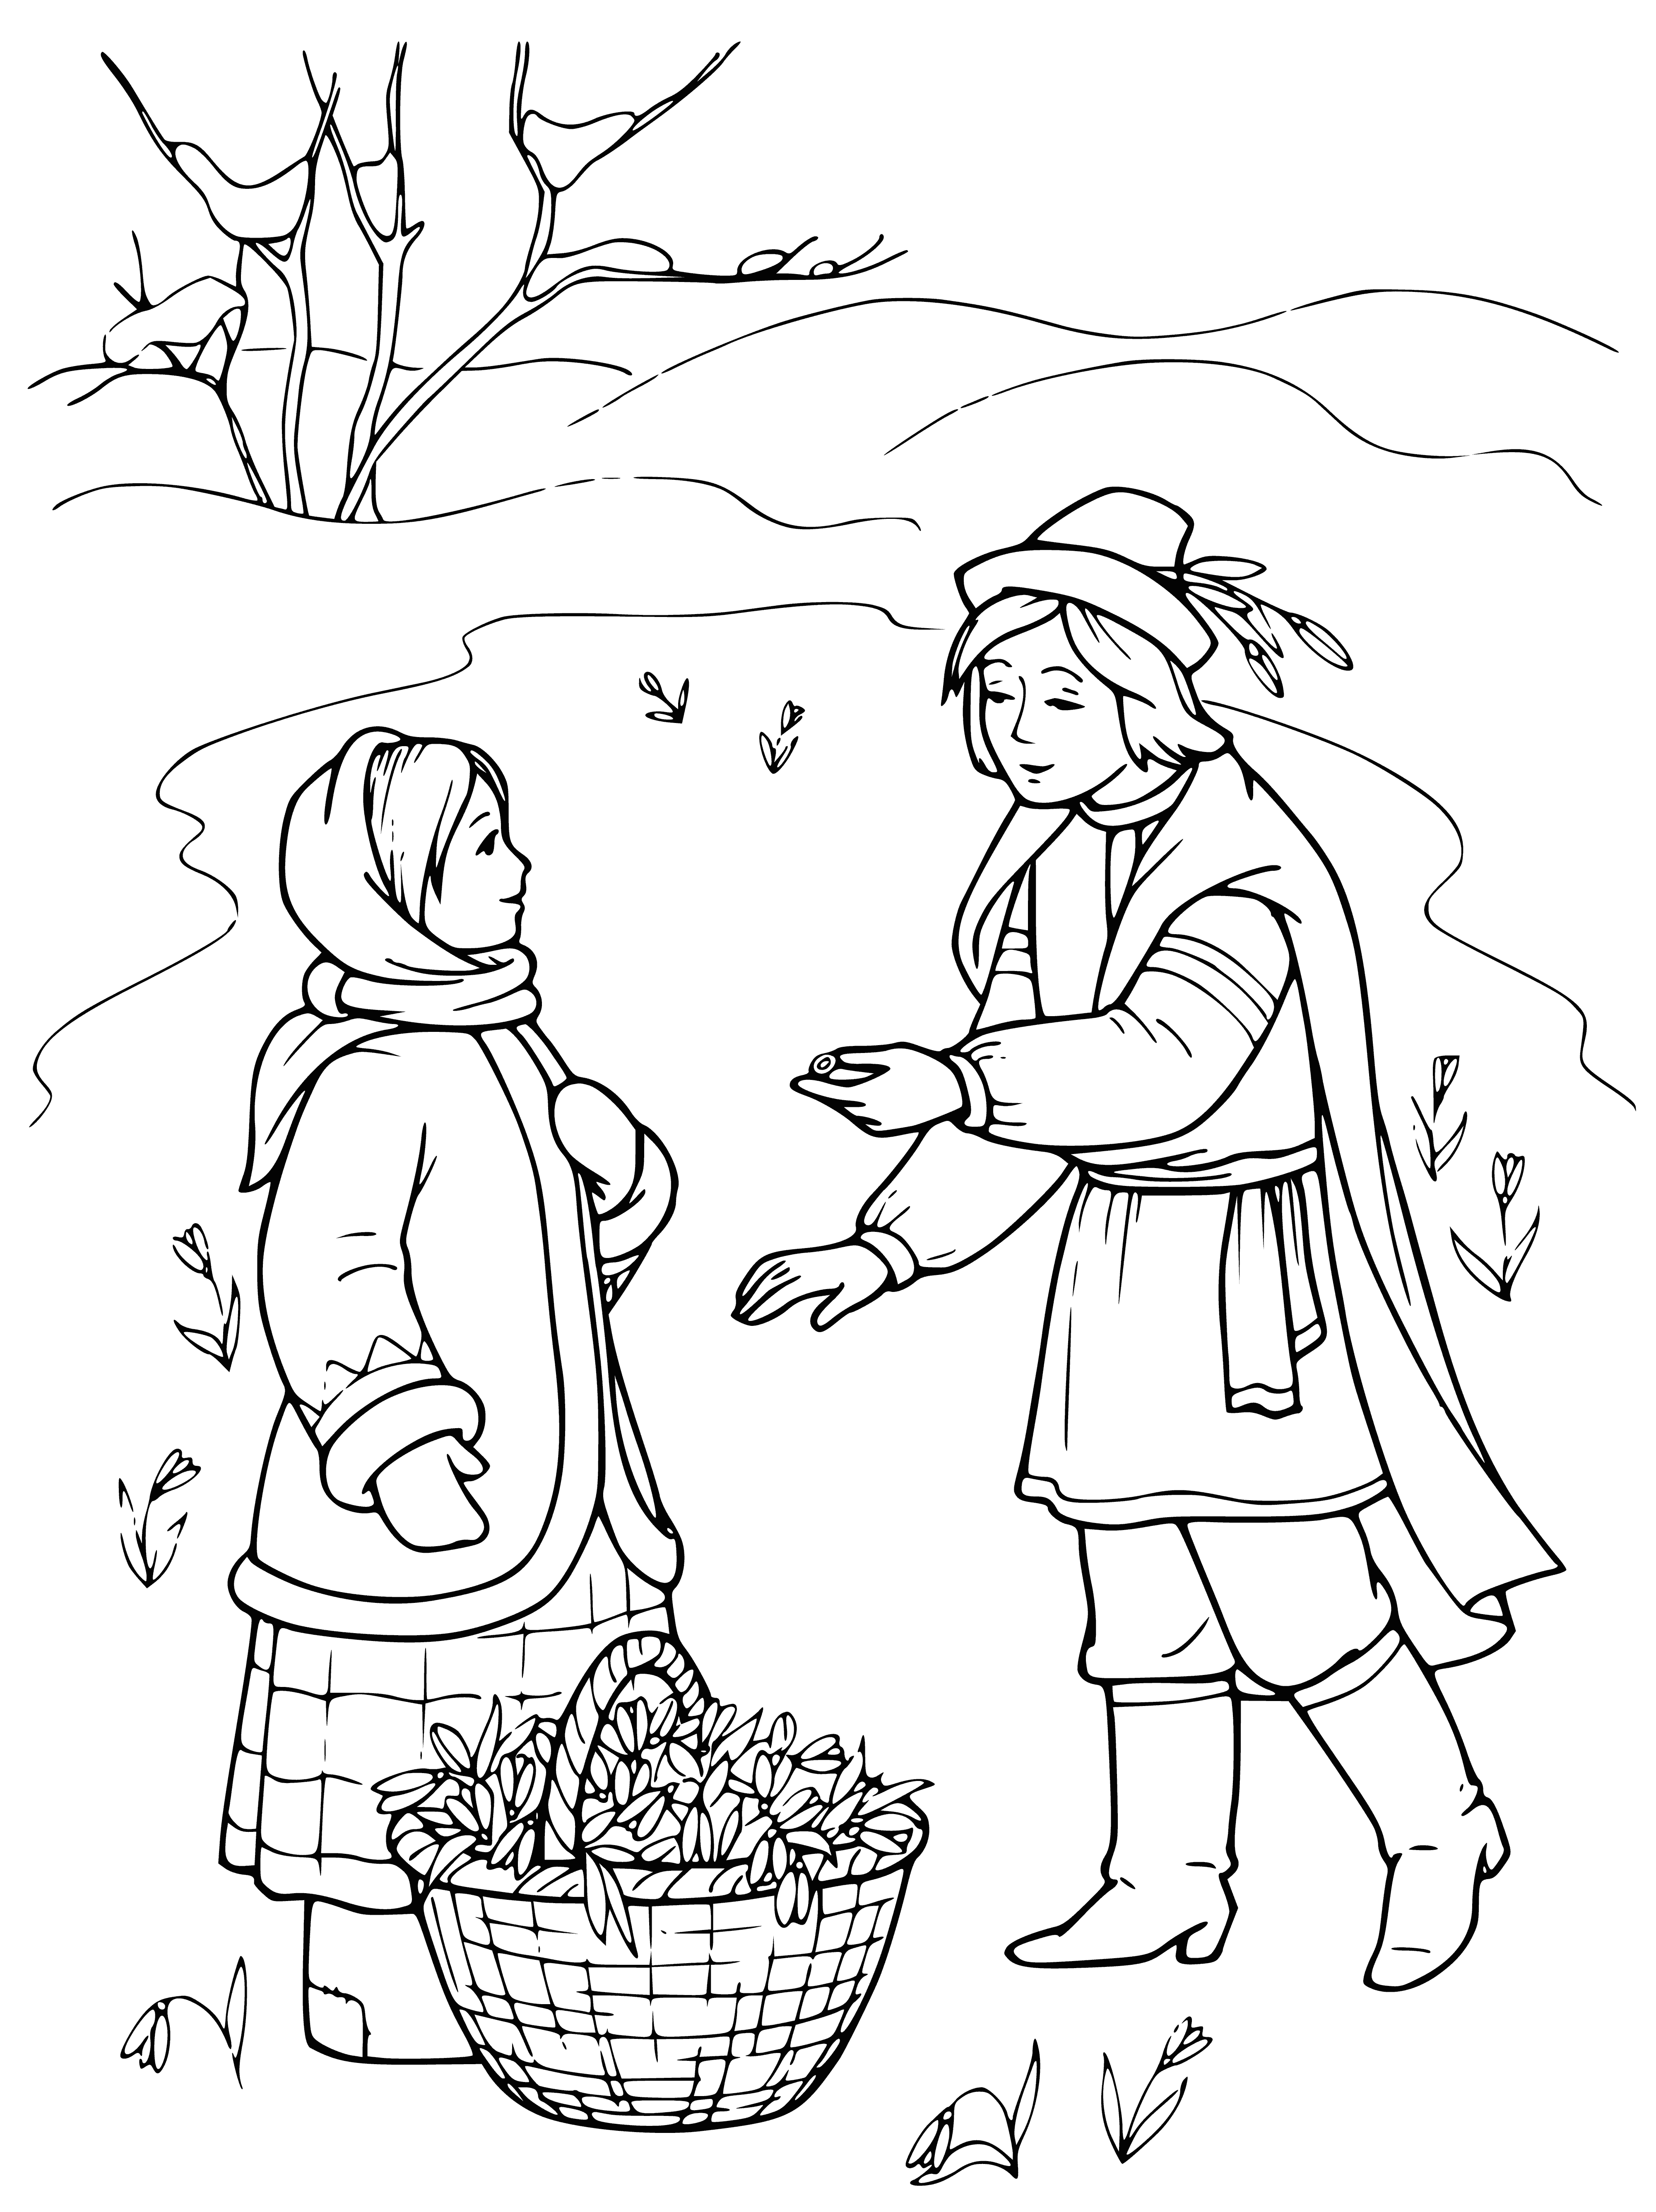 Subdaughter coloring page